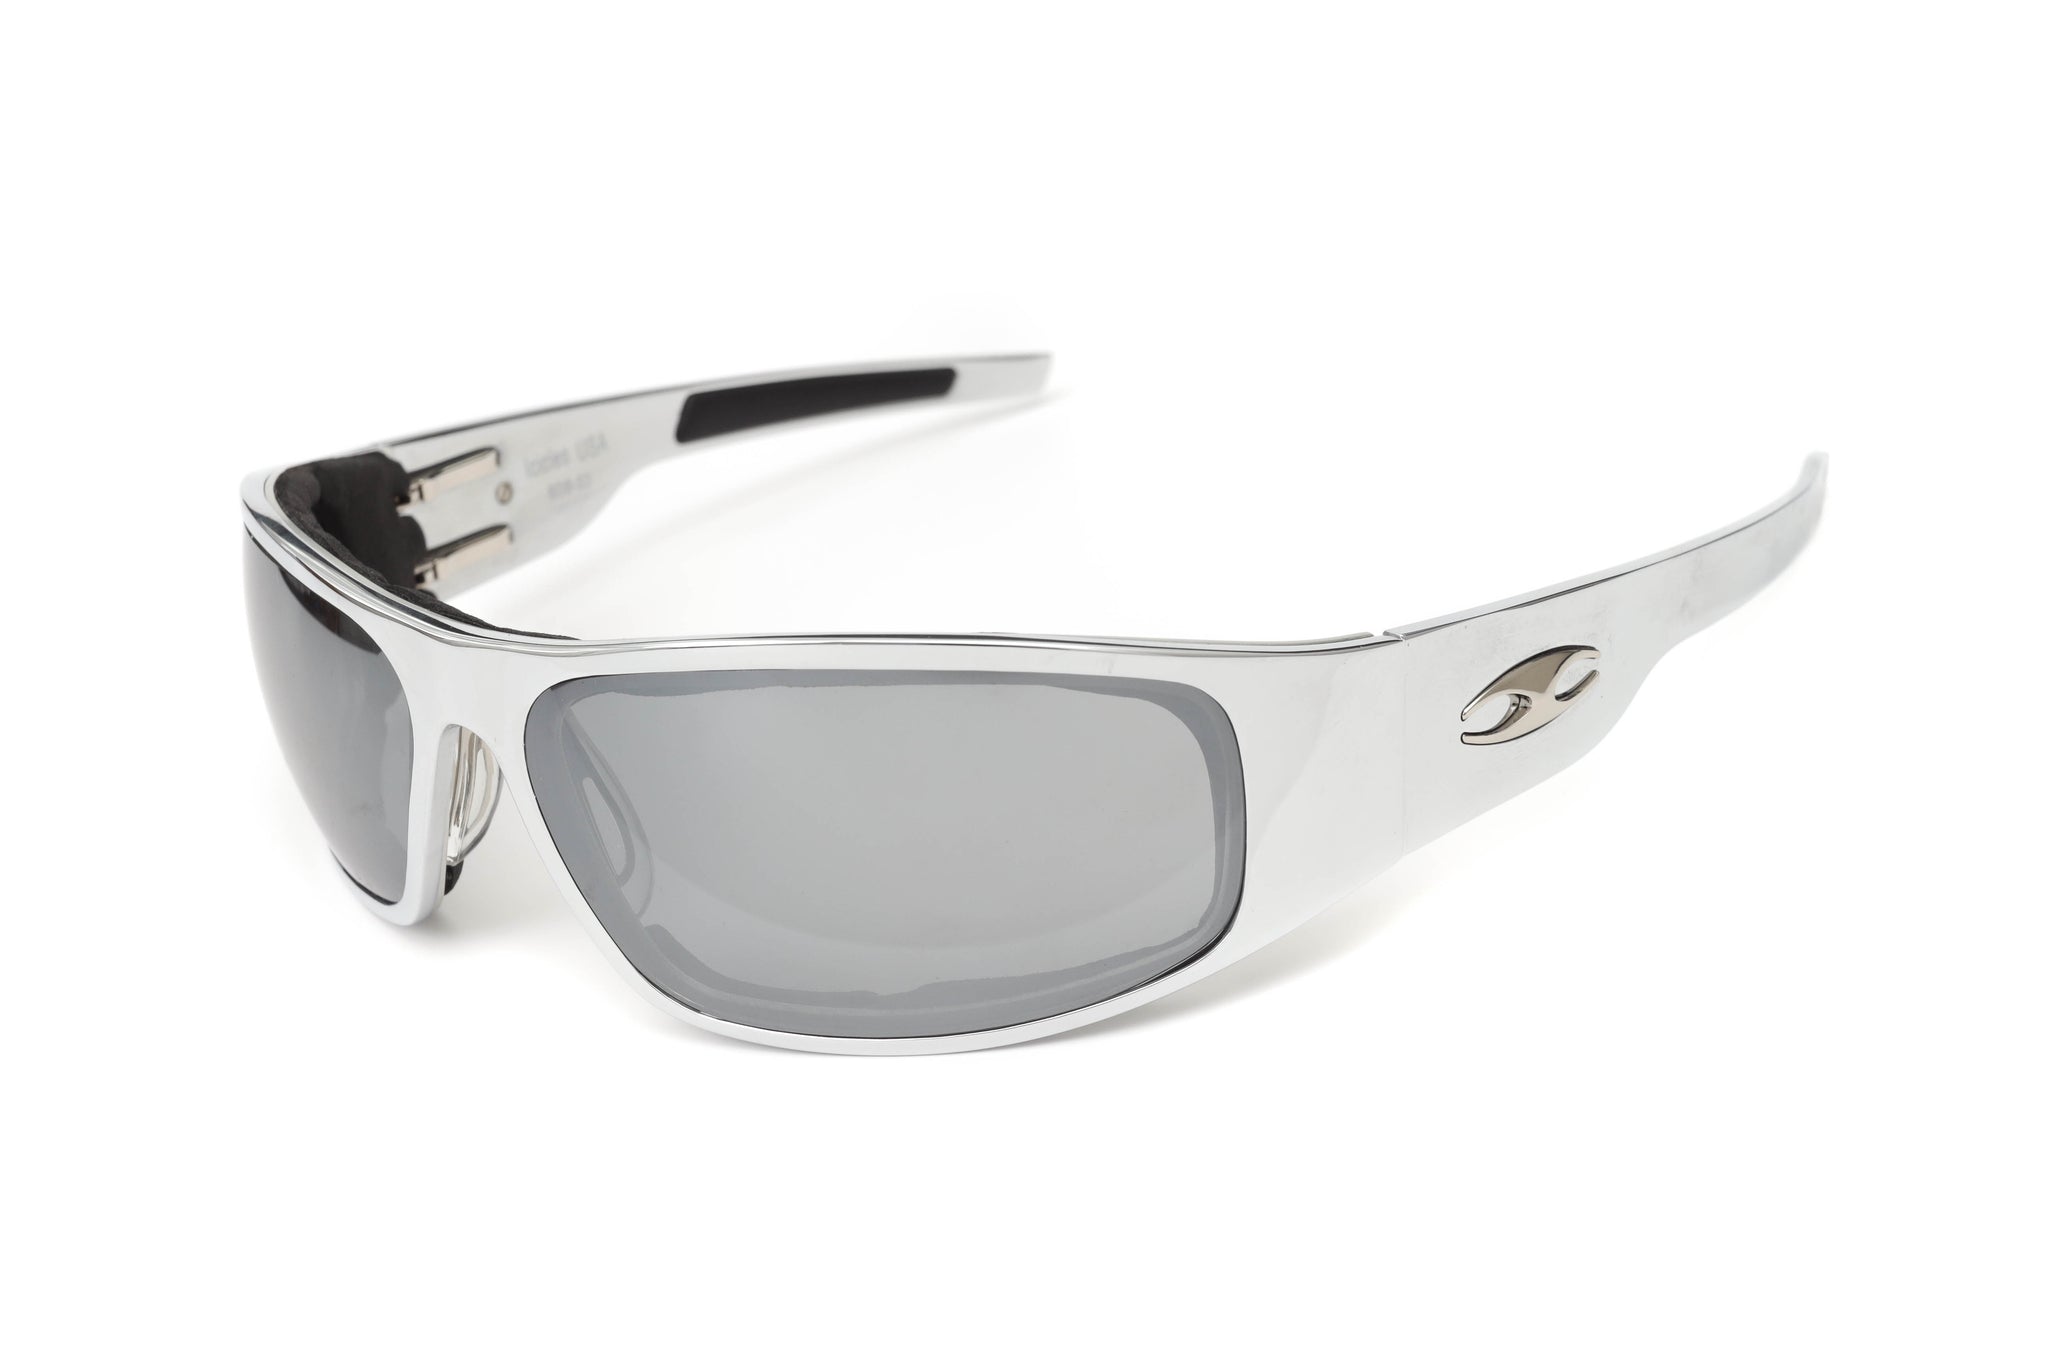 Big Daddy Bagger Chrome Motorcycle Sunglasses - Smooth Frame